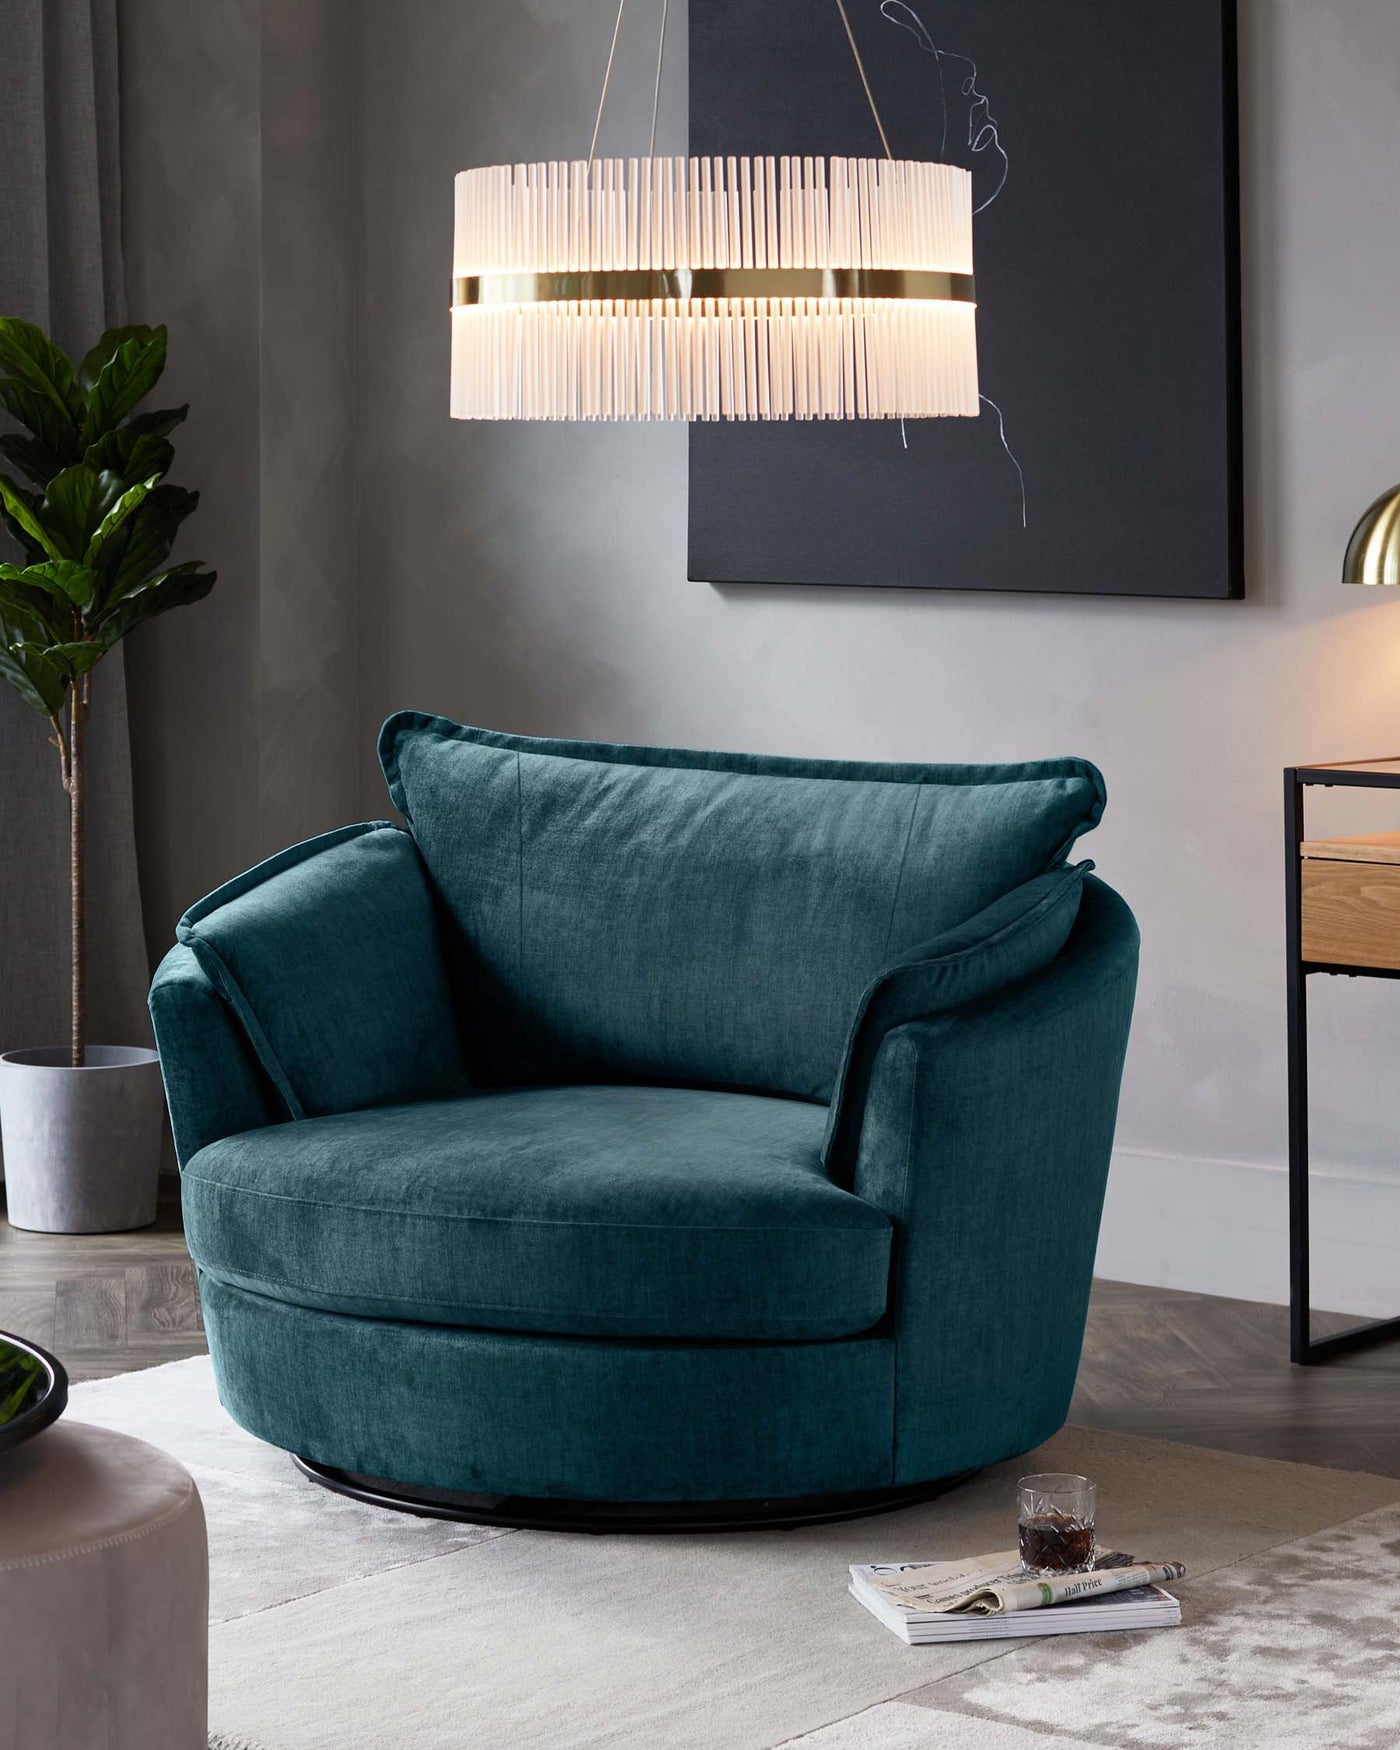 Luxurious deep teal velvet swivel chair with plush curved backrest and large rounded seat cushion. An adjacent sleek wood and metal side table with minimalistic design complements the chair. Elegant cylindrical pendant light with vertical slats hangs above, casting a soft glow. The setting includes a grey textured rug, a potted green plant to the left, and hints of a contemporary art piece in the background, creating a sophisticated ambiance.